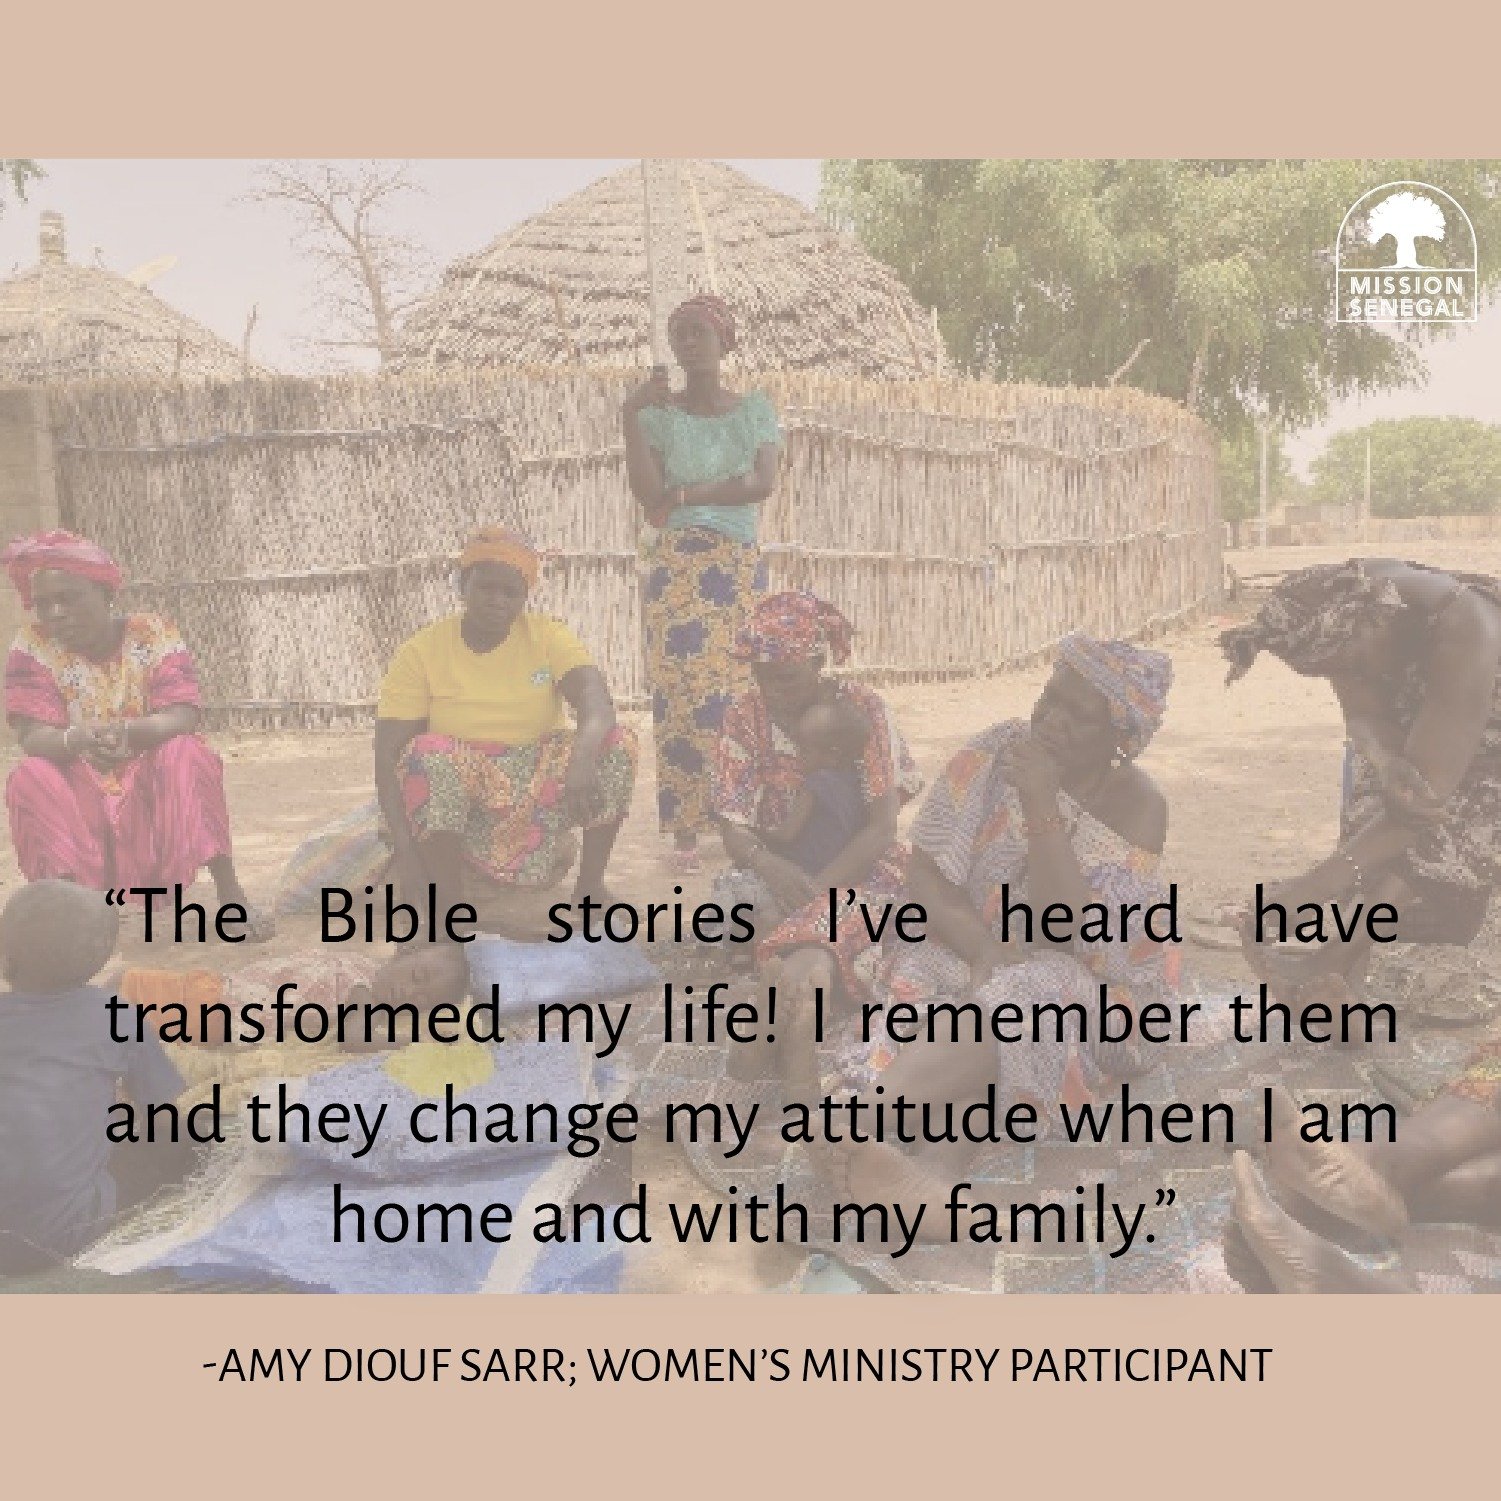 The Women's Program has been meeting for a Discover God Bible study. Christian and non-Christian women are gathering to discuss the aspects of who God is and how that impacts their daily lives. 

The first session gave space for women to express thei